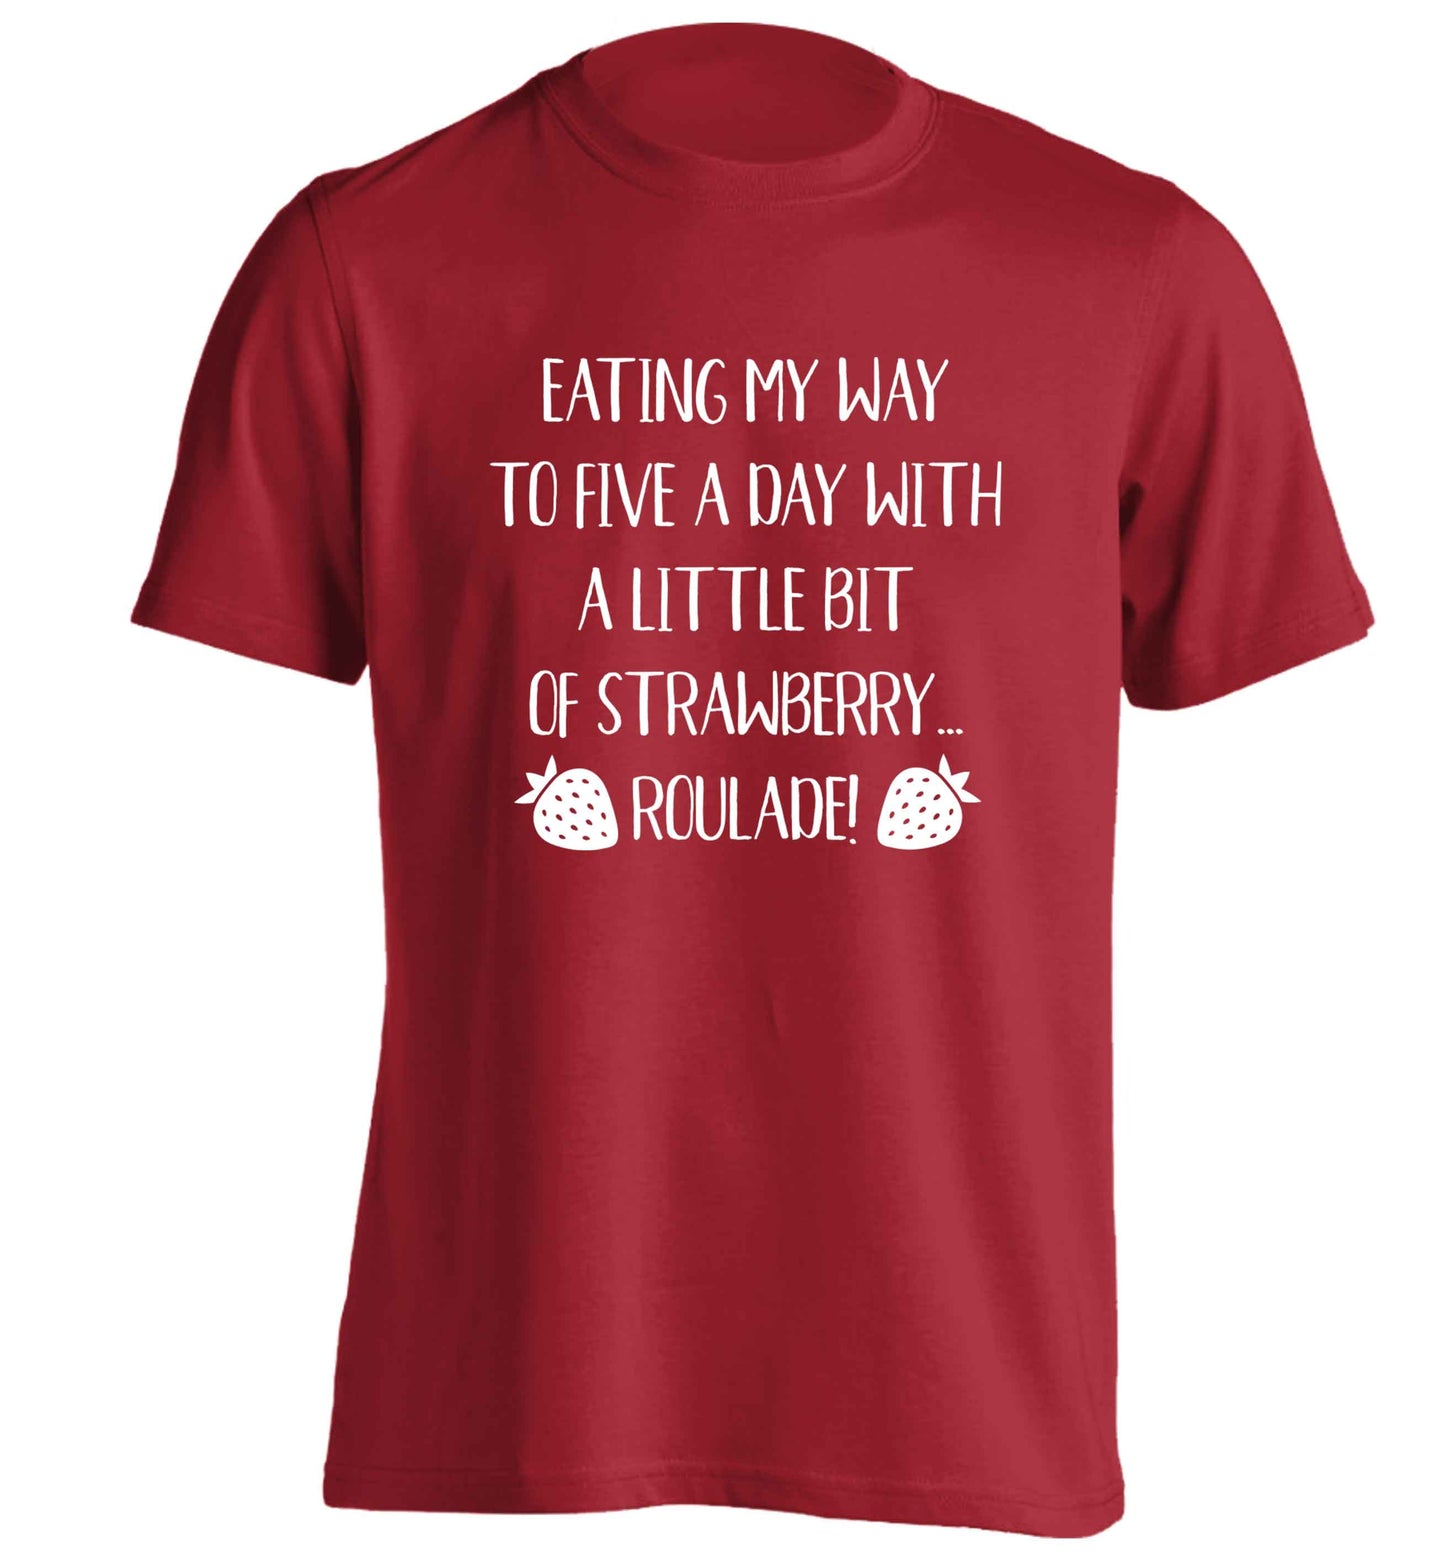 Eating my way to five a day with a little bit of strawberry roulade adults unisex red Tshirt 2XL